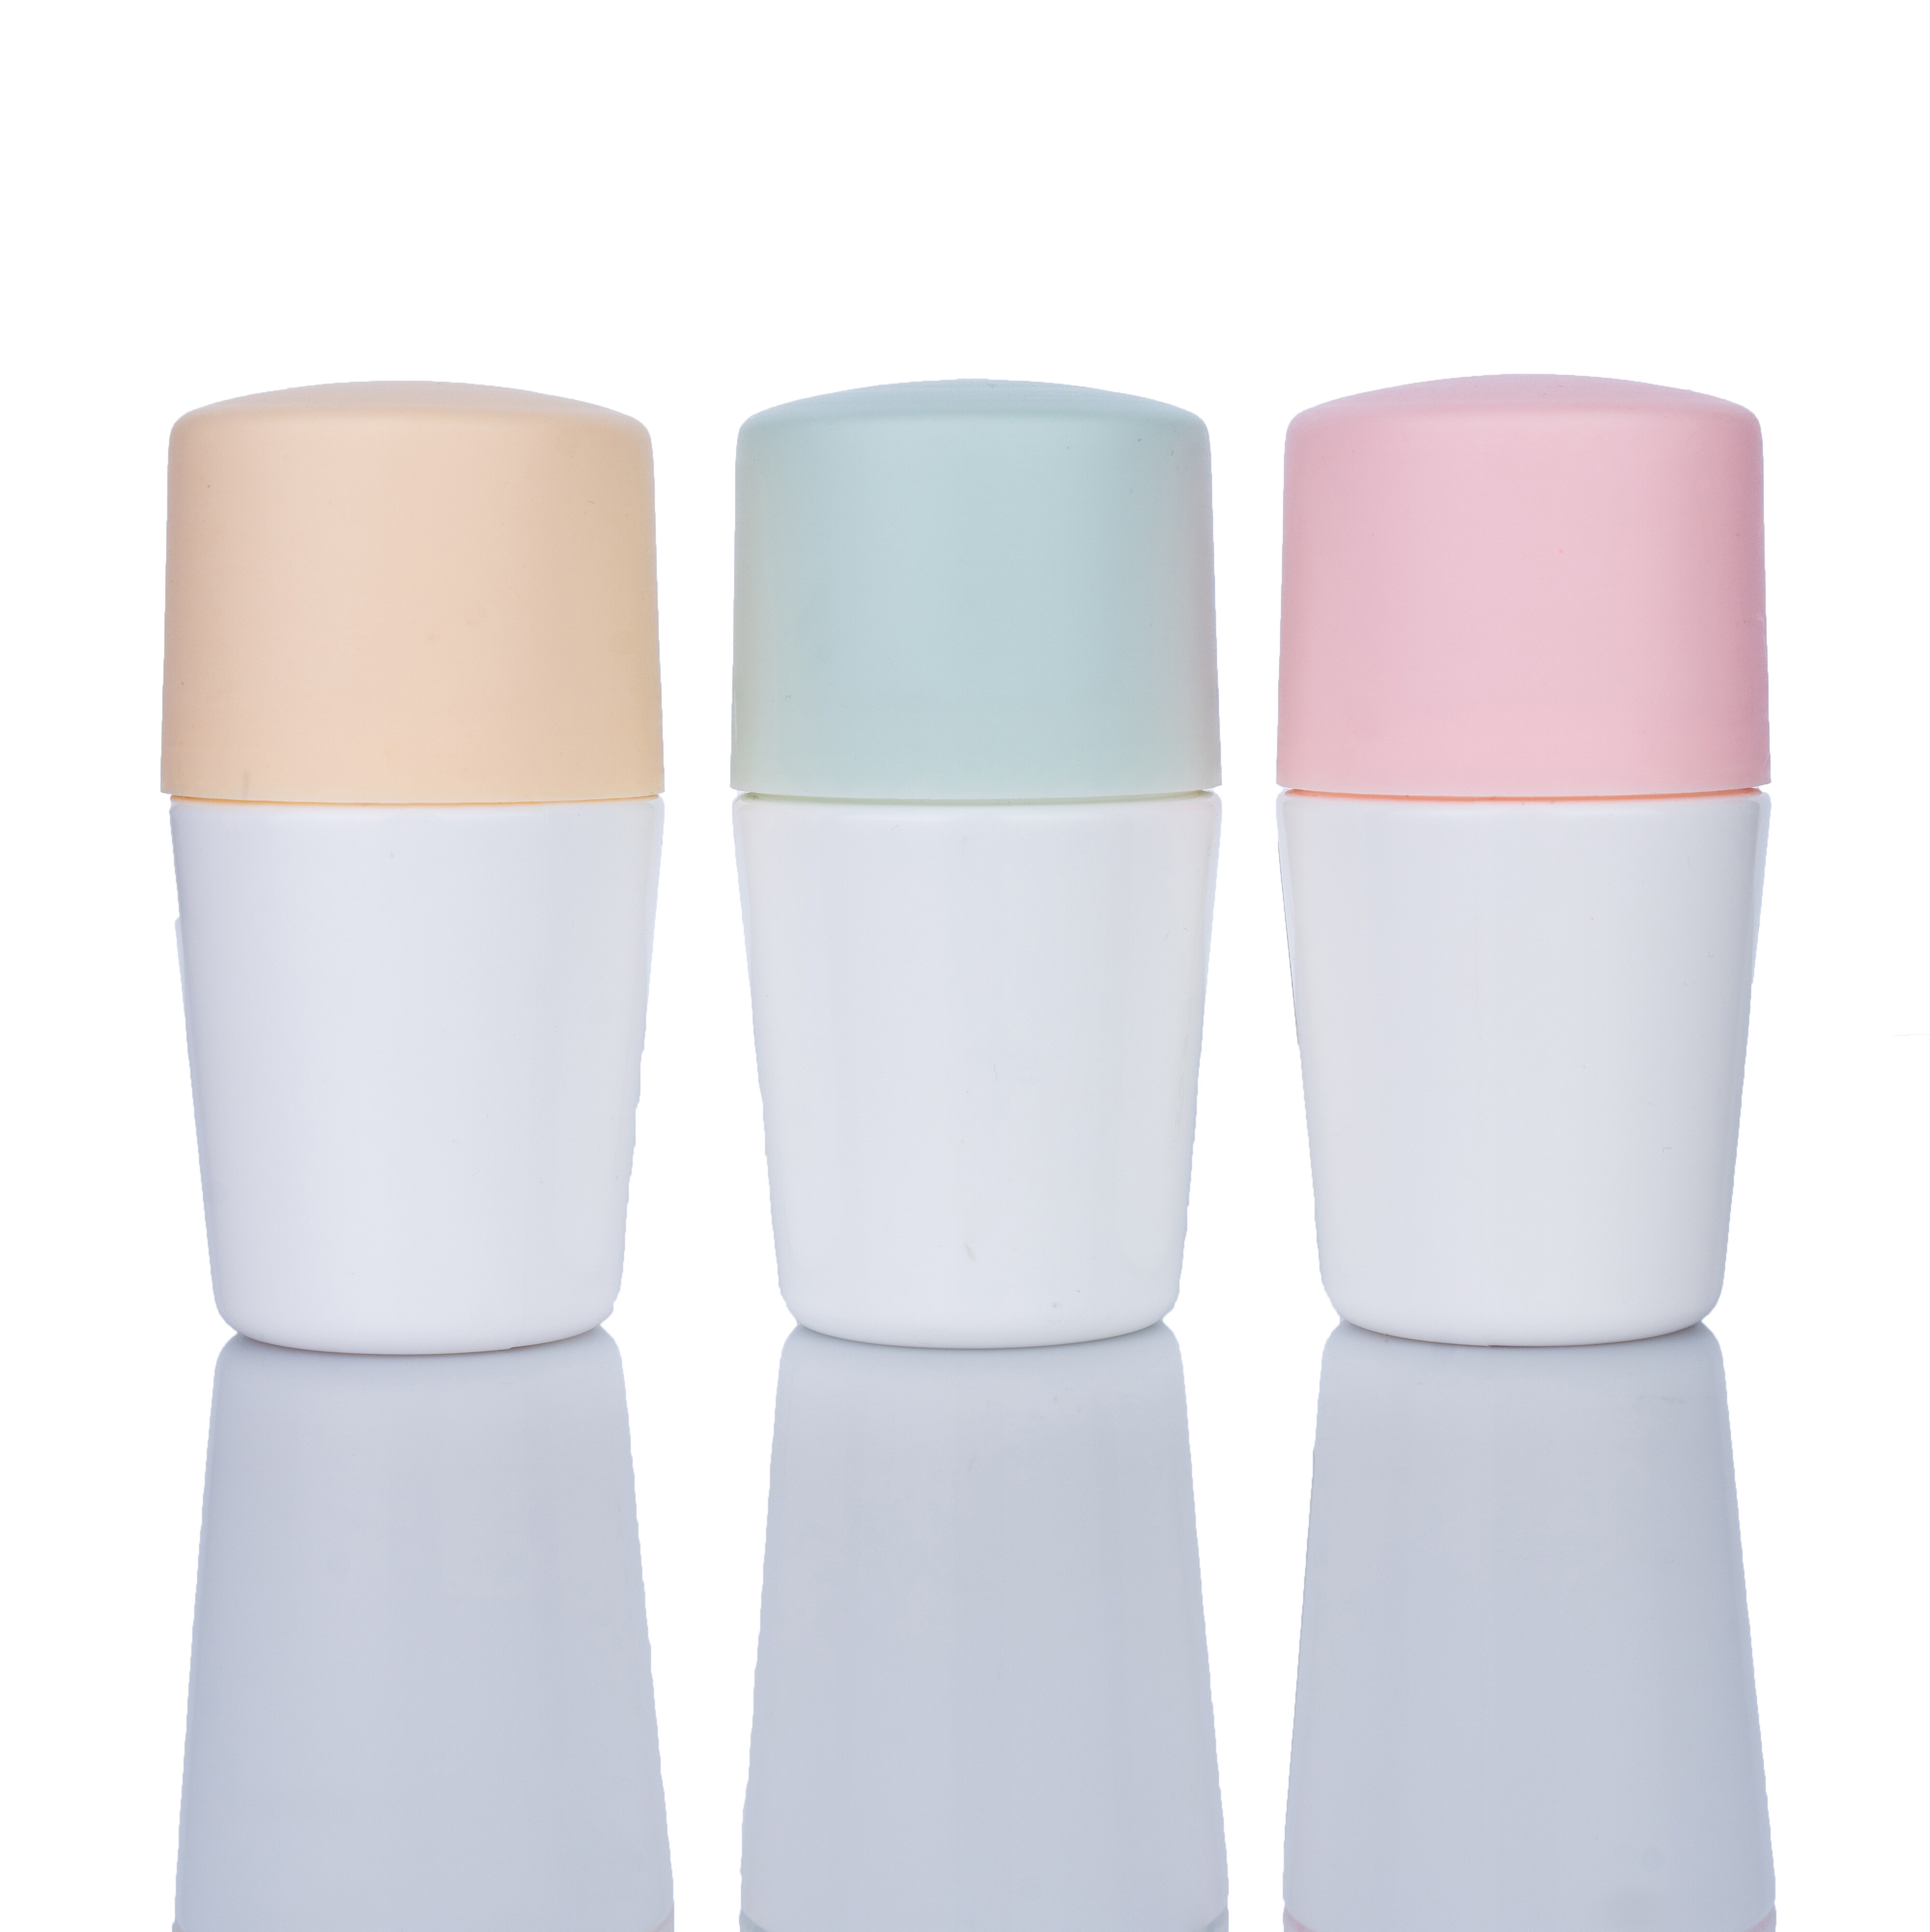 ROB001 Small Fresh Roller Ball Bottle in Macaron Color